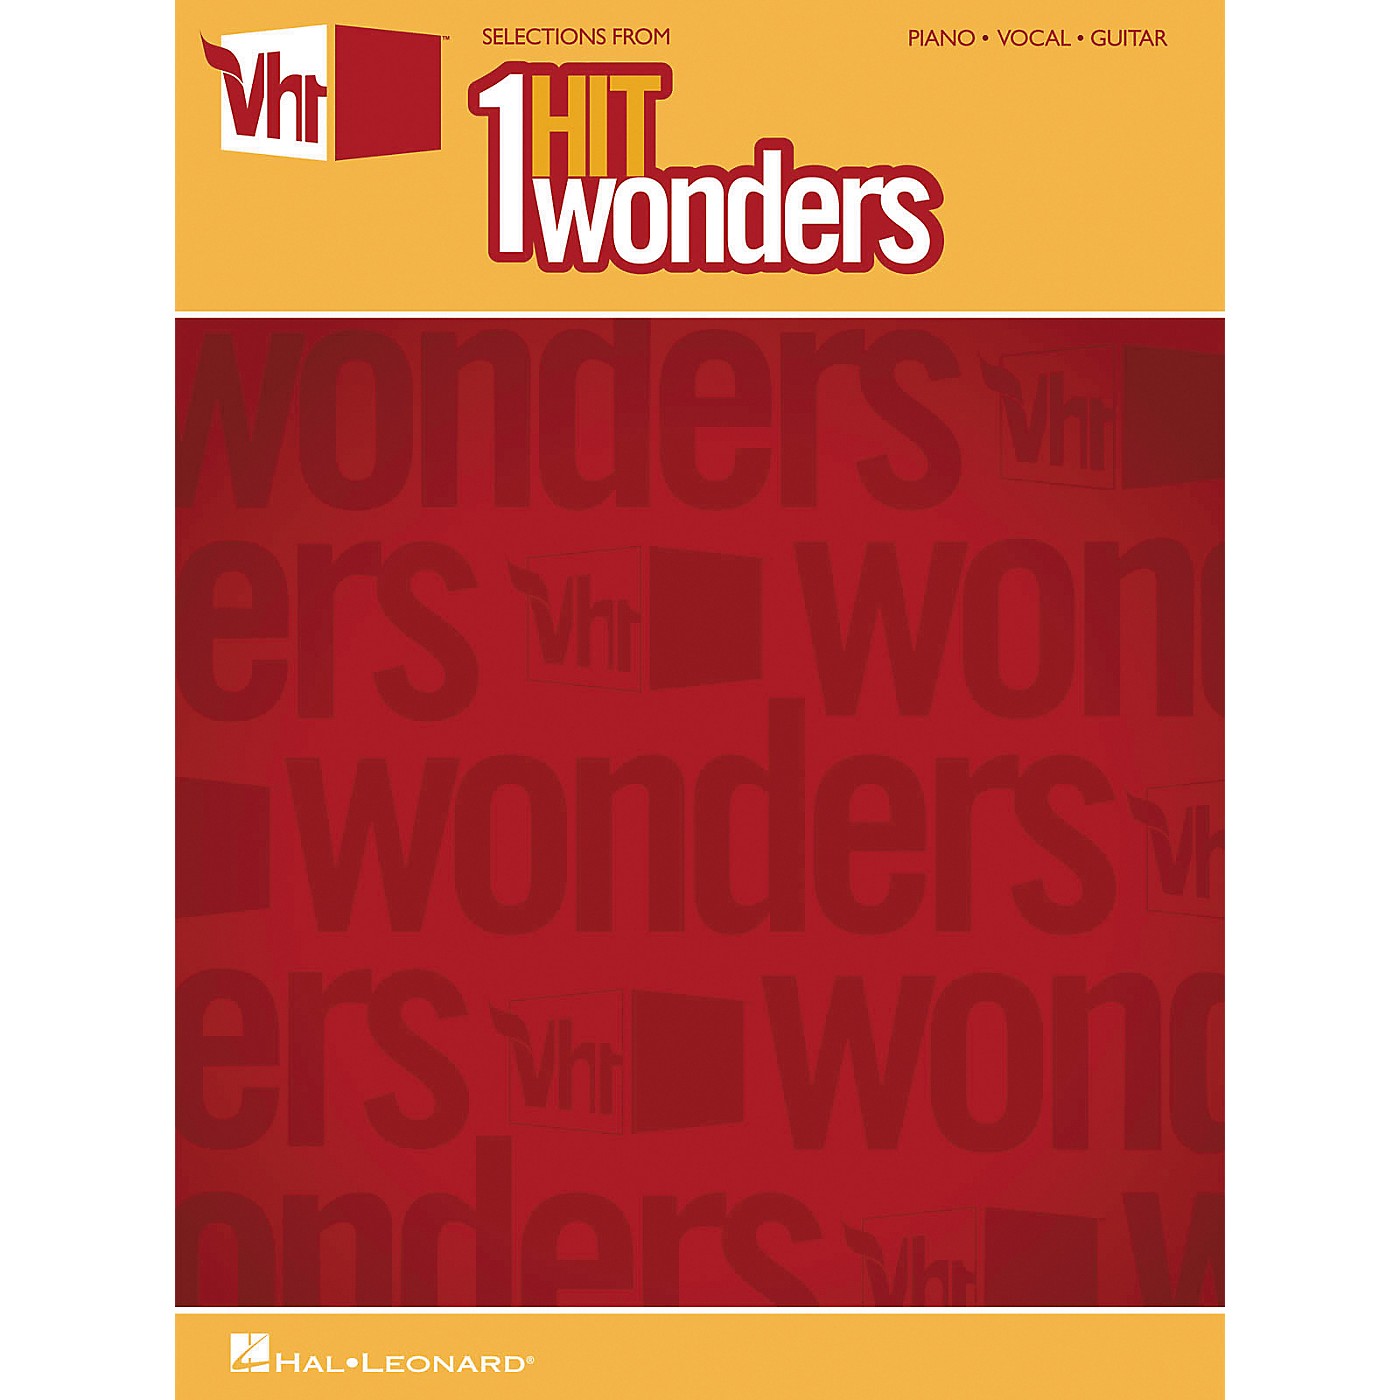 Hal Leonard Selections From VH1's 1-Hit Wonders Piano, Vocal, Guitar Songbook thumbnail